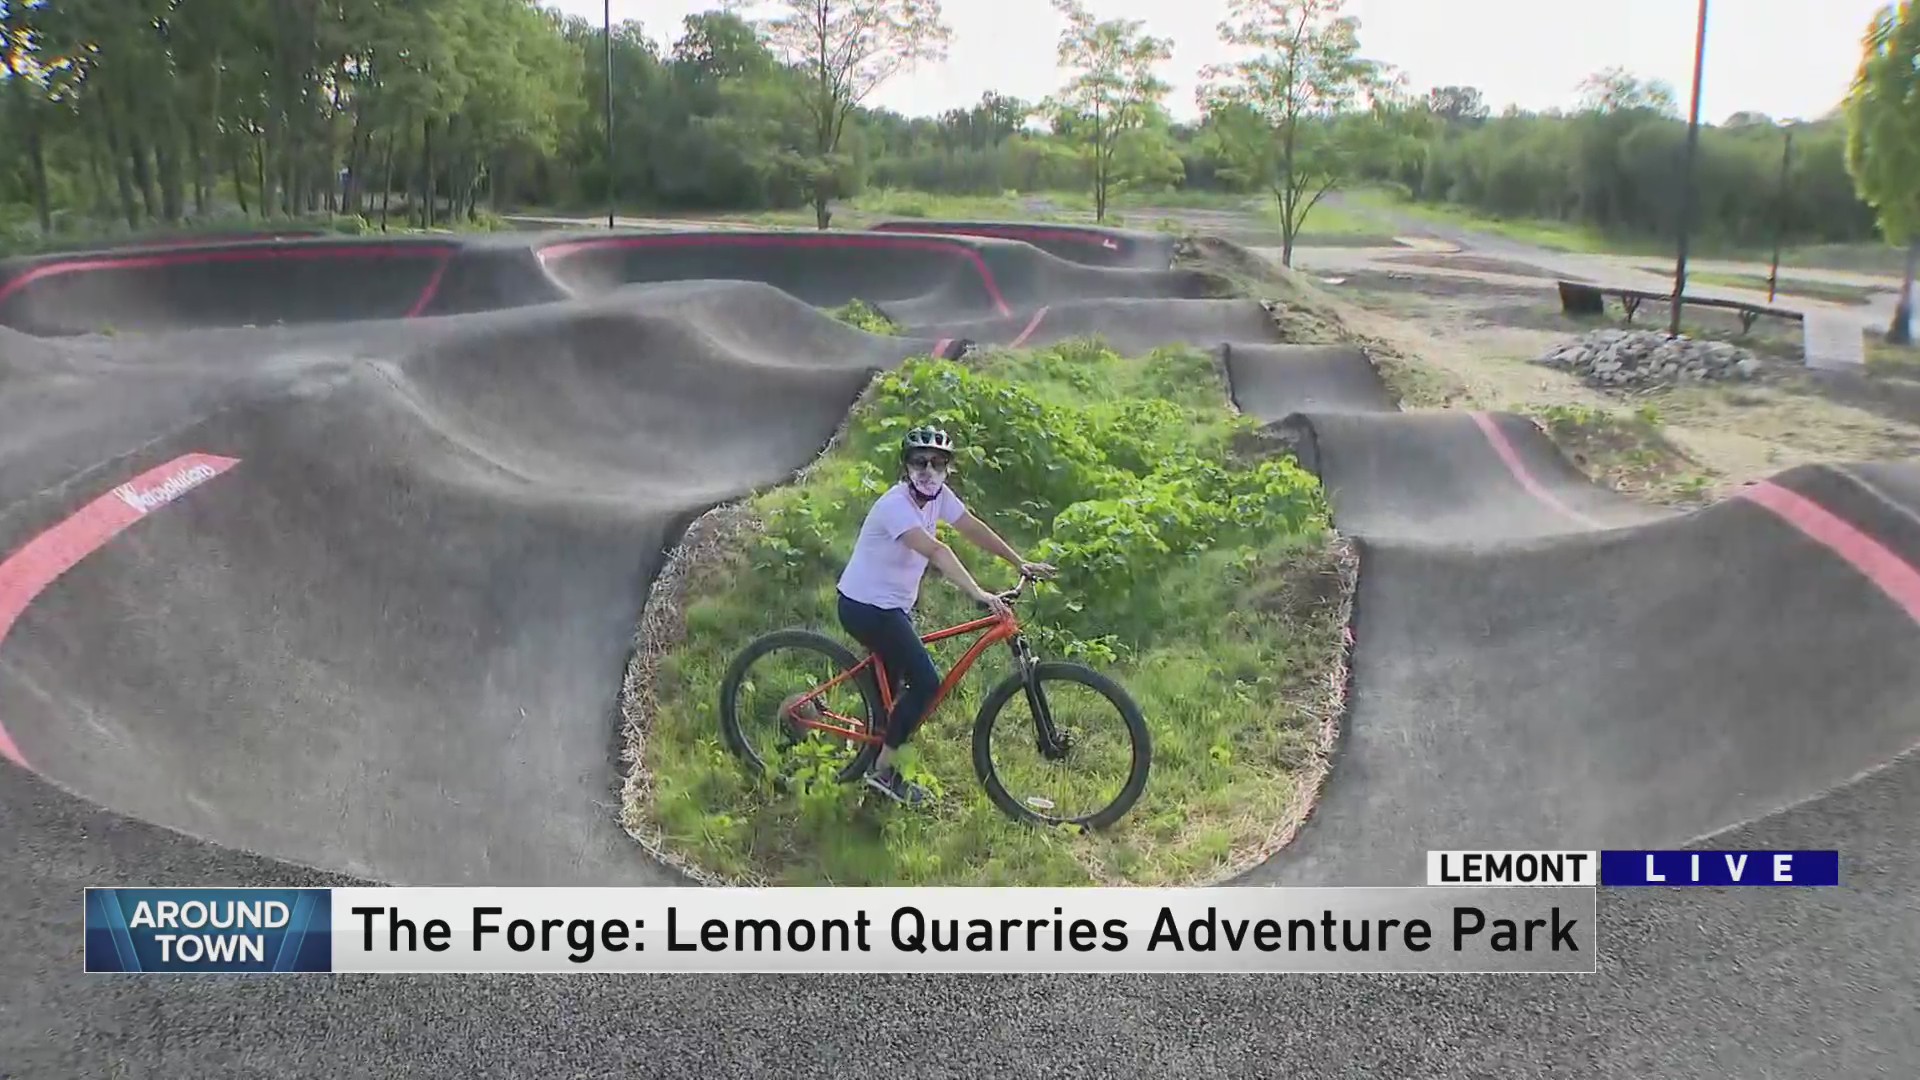 Around Town checks out The Forge: Lemont Quarries Outdoor Adventure Park